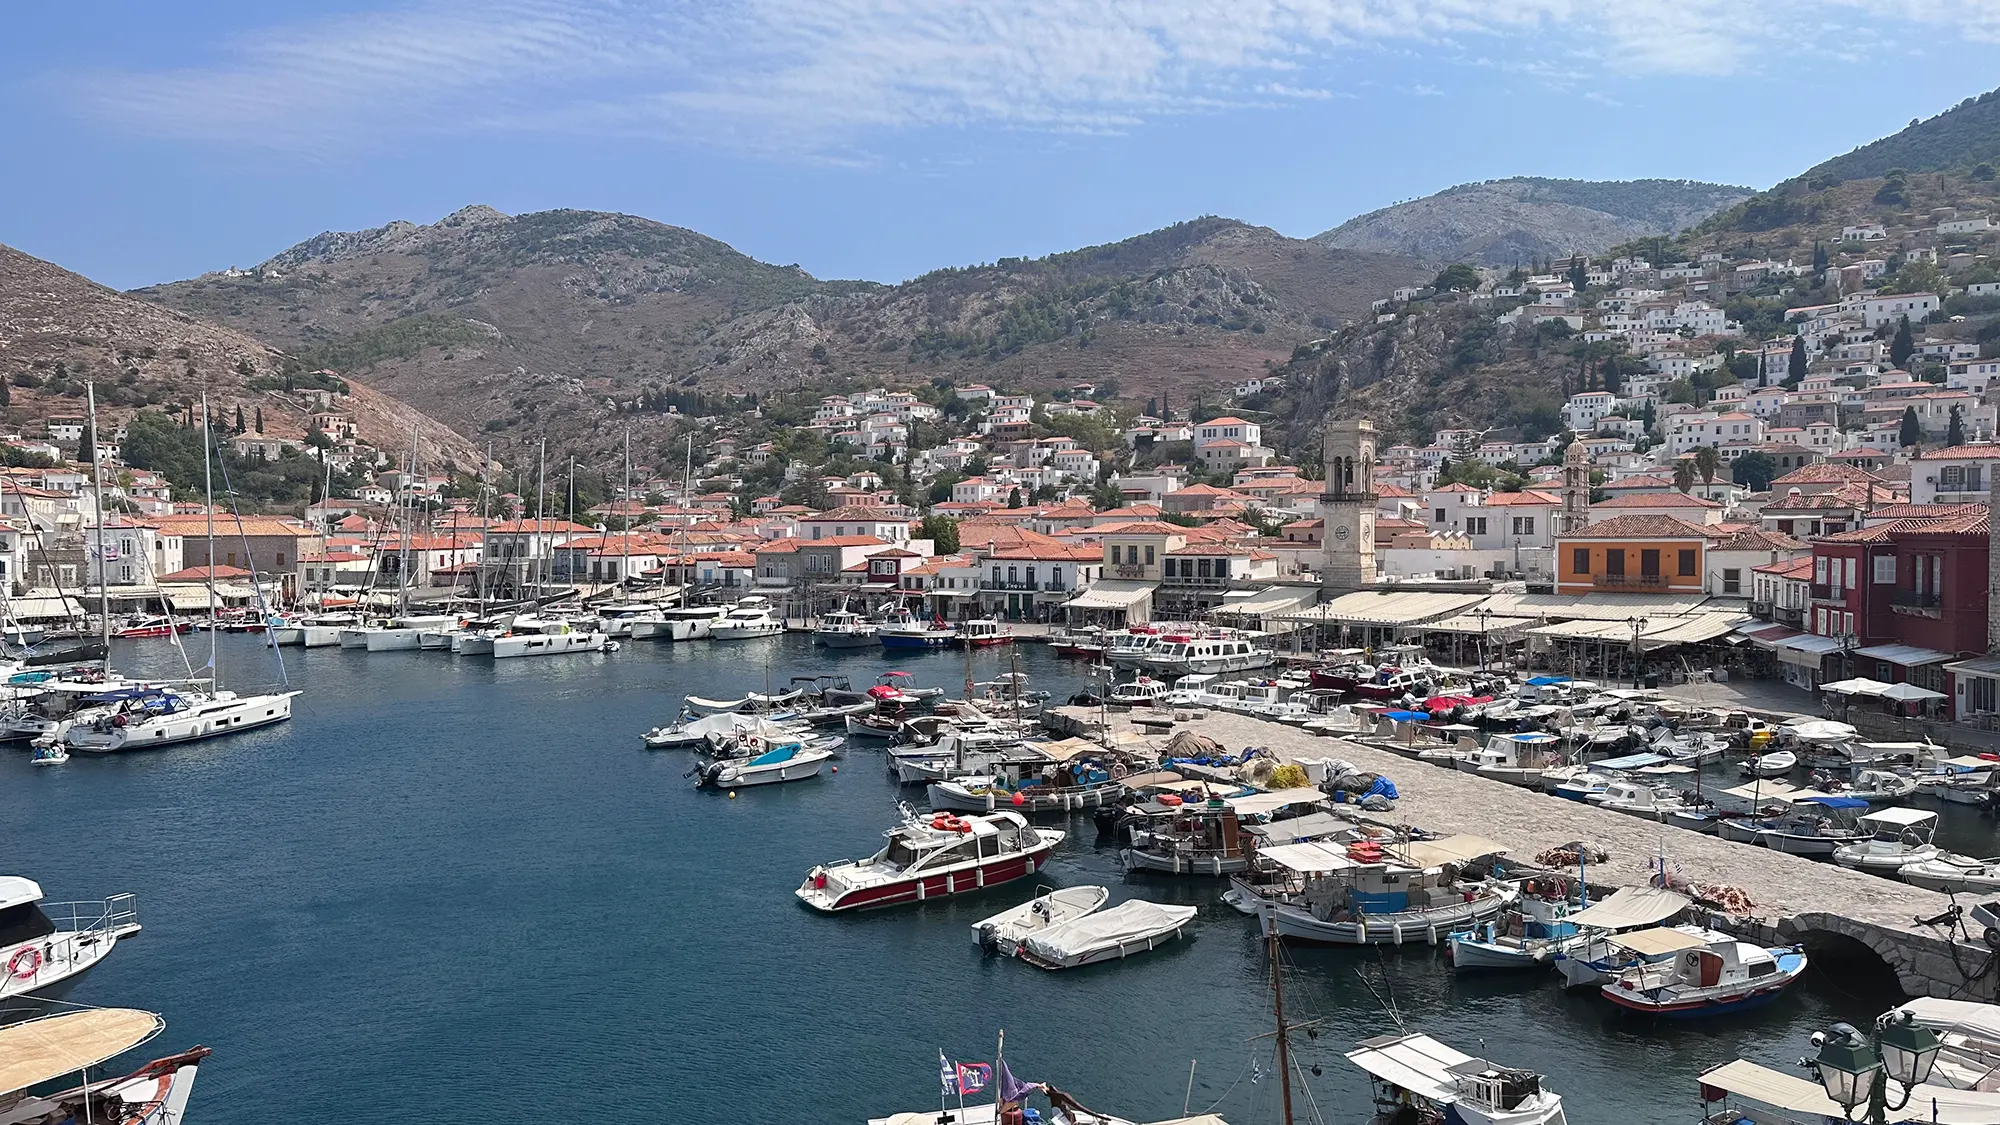 Hydra Island, Greece, munchies art club magazine discover the island and showcase exhibition, food, and more